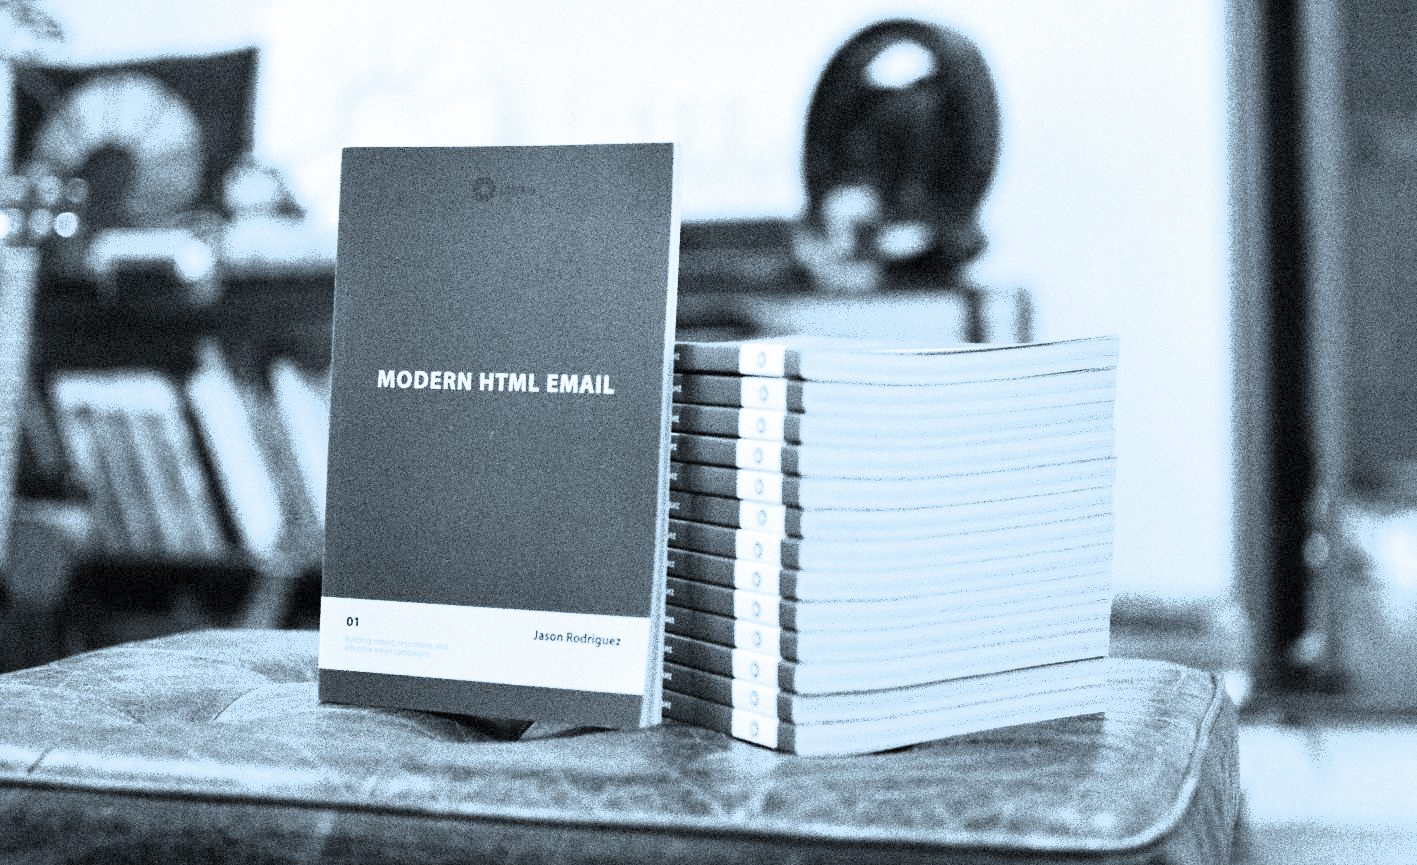 A stack of Modern HTML Email books.